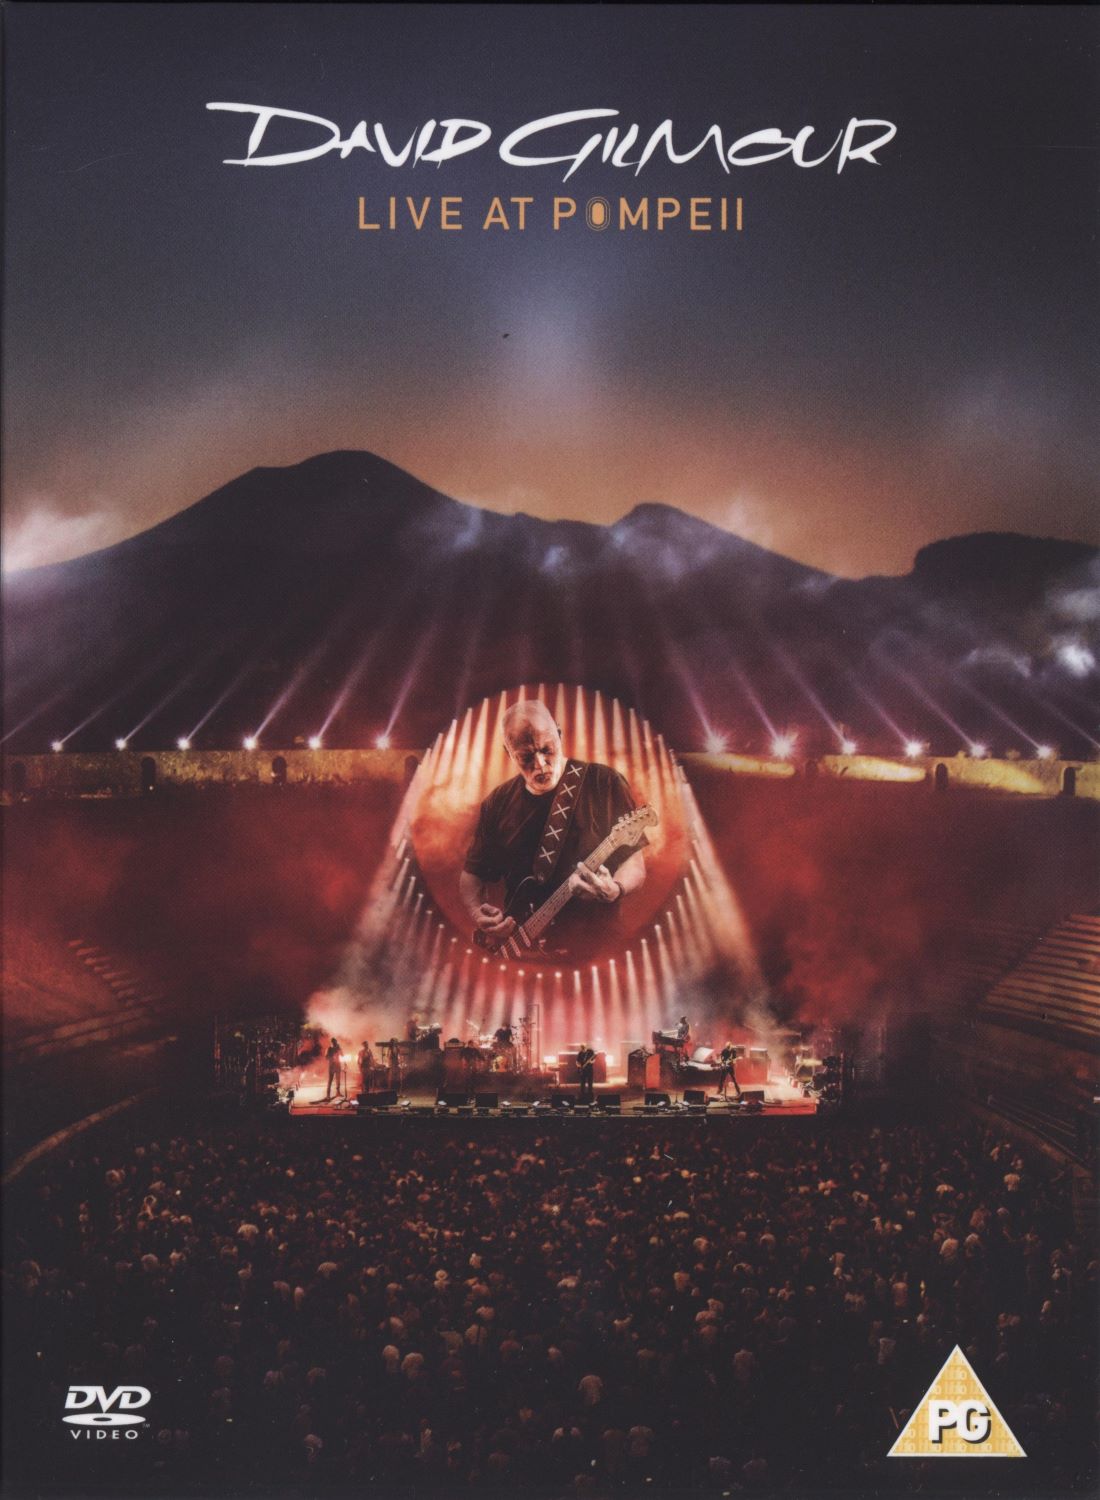 David Gilmour - Live At Pompeii [2017, Psychedelic Rock, 2xDVD9]